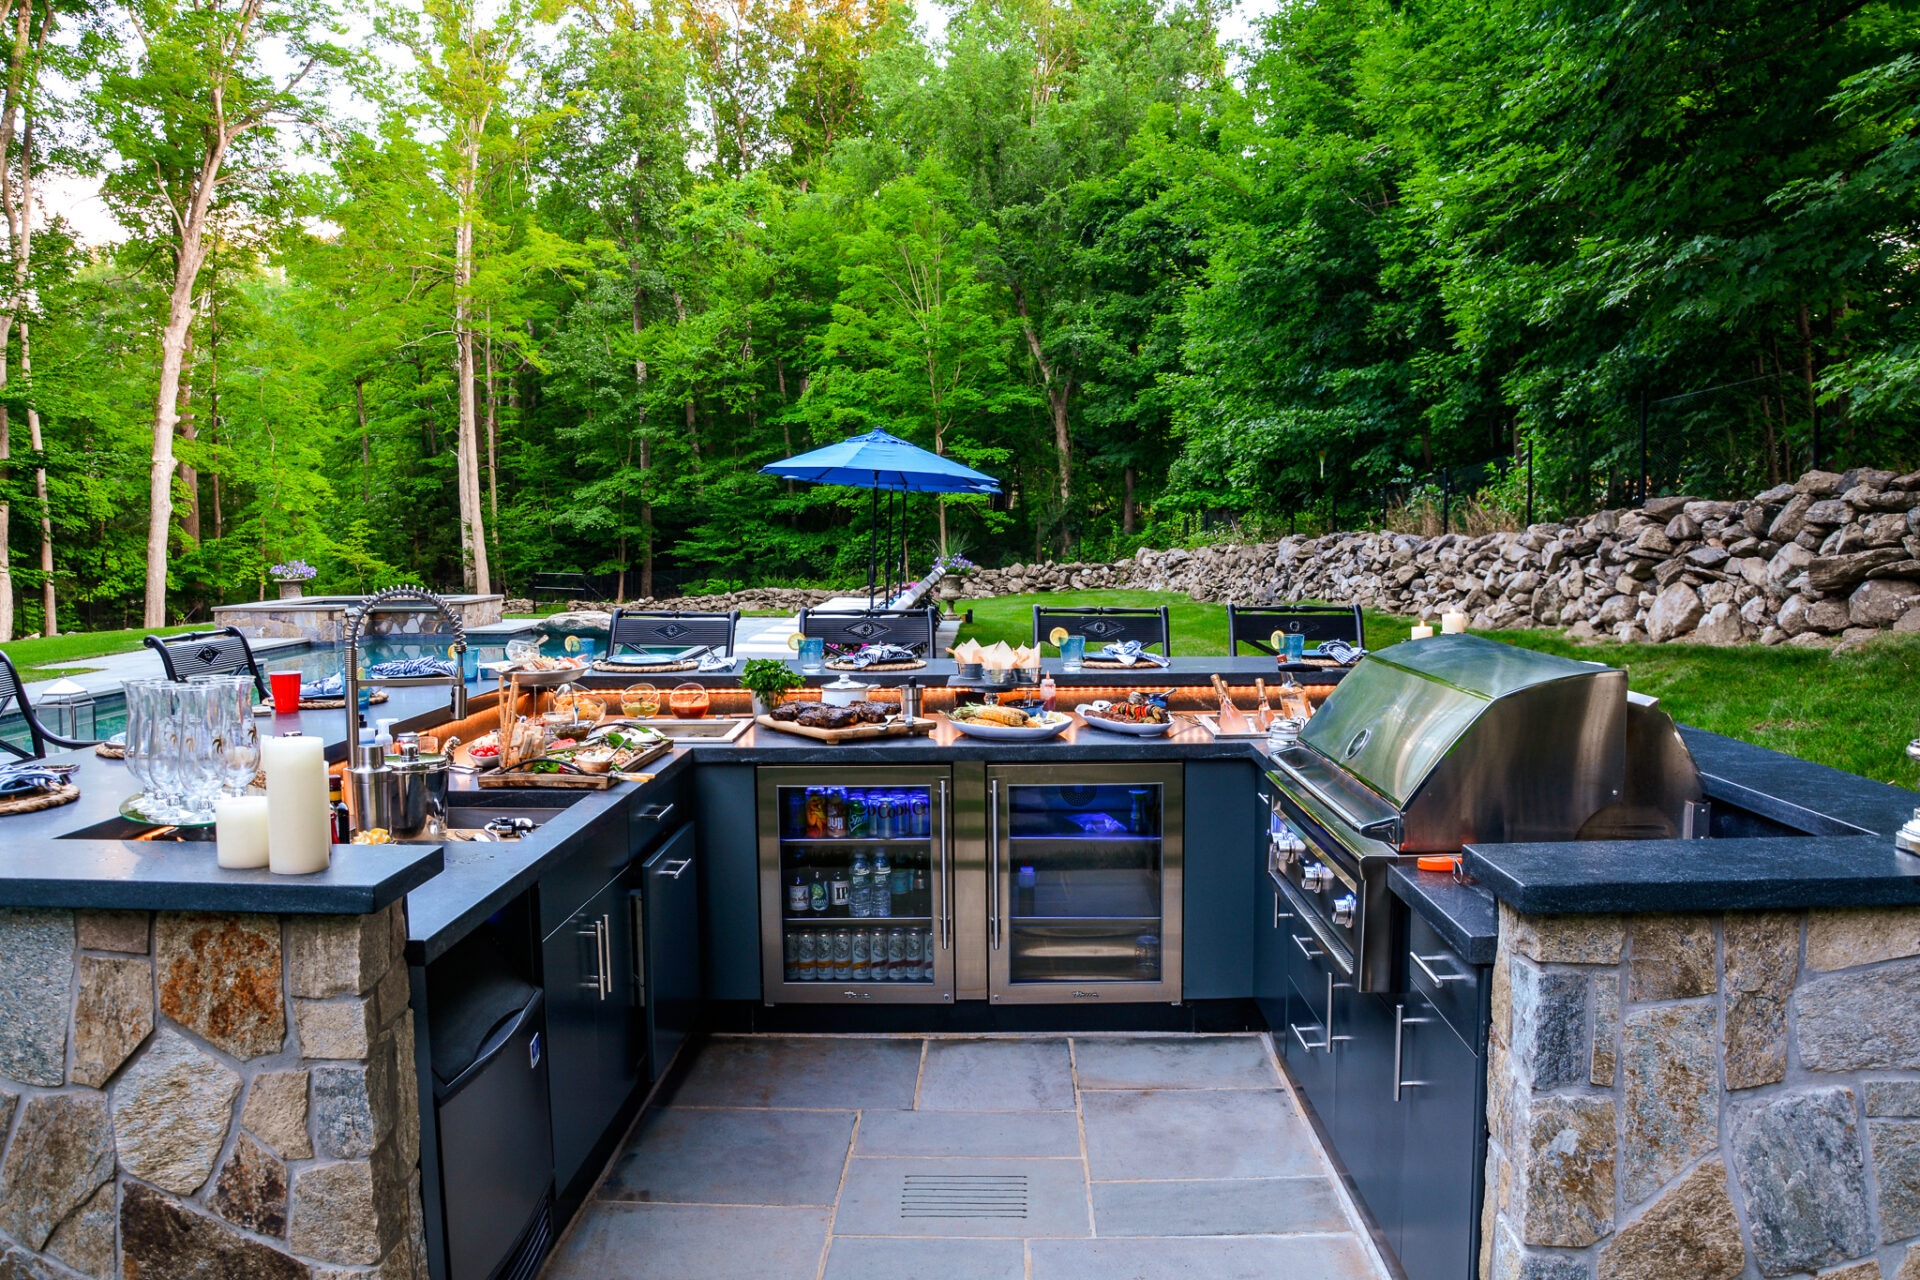 An outdoor kitchen with barbecue grills and a variety of foods set in a patio surrounded by lush greenery and a stone wall.